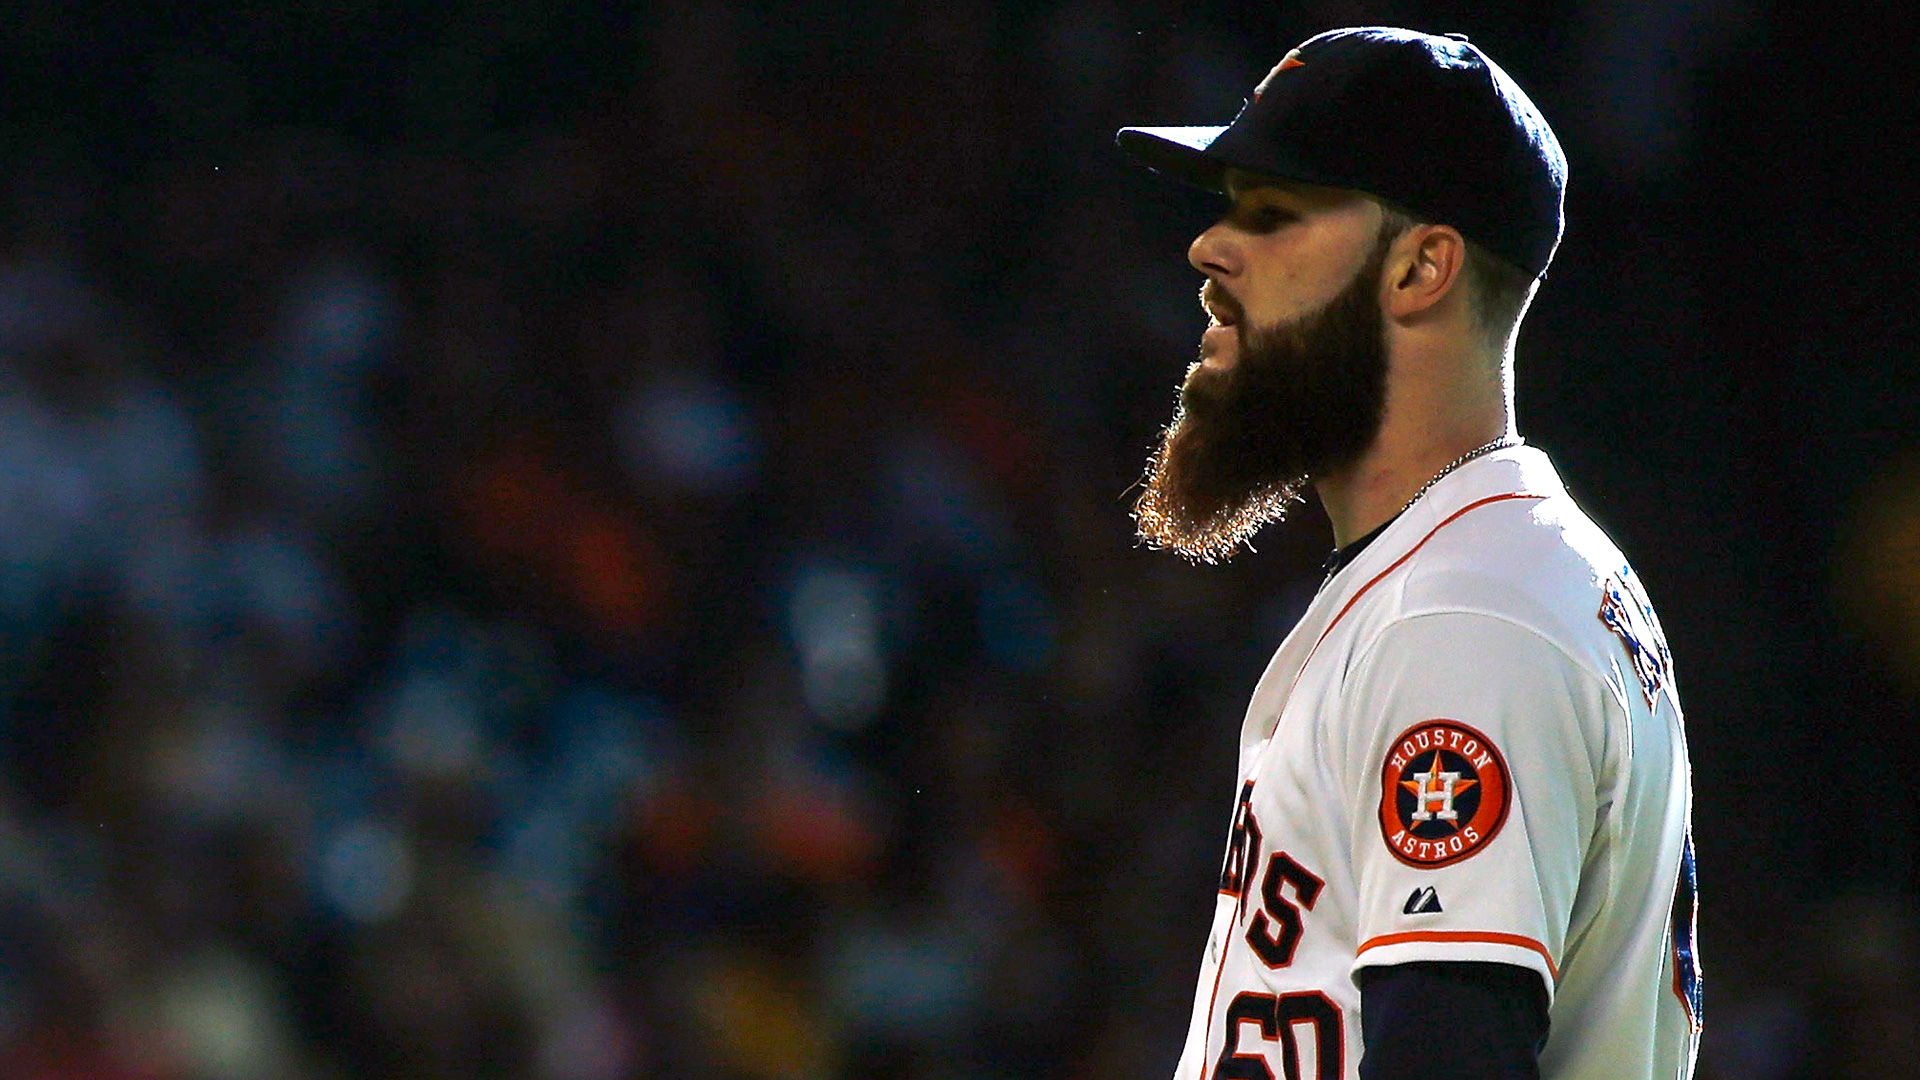 Dallas Keuchel's neck issues should prompt Astros to trade for a pitcher | MLB ...1920 x 1080